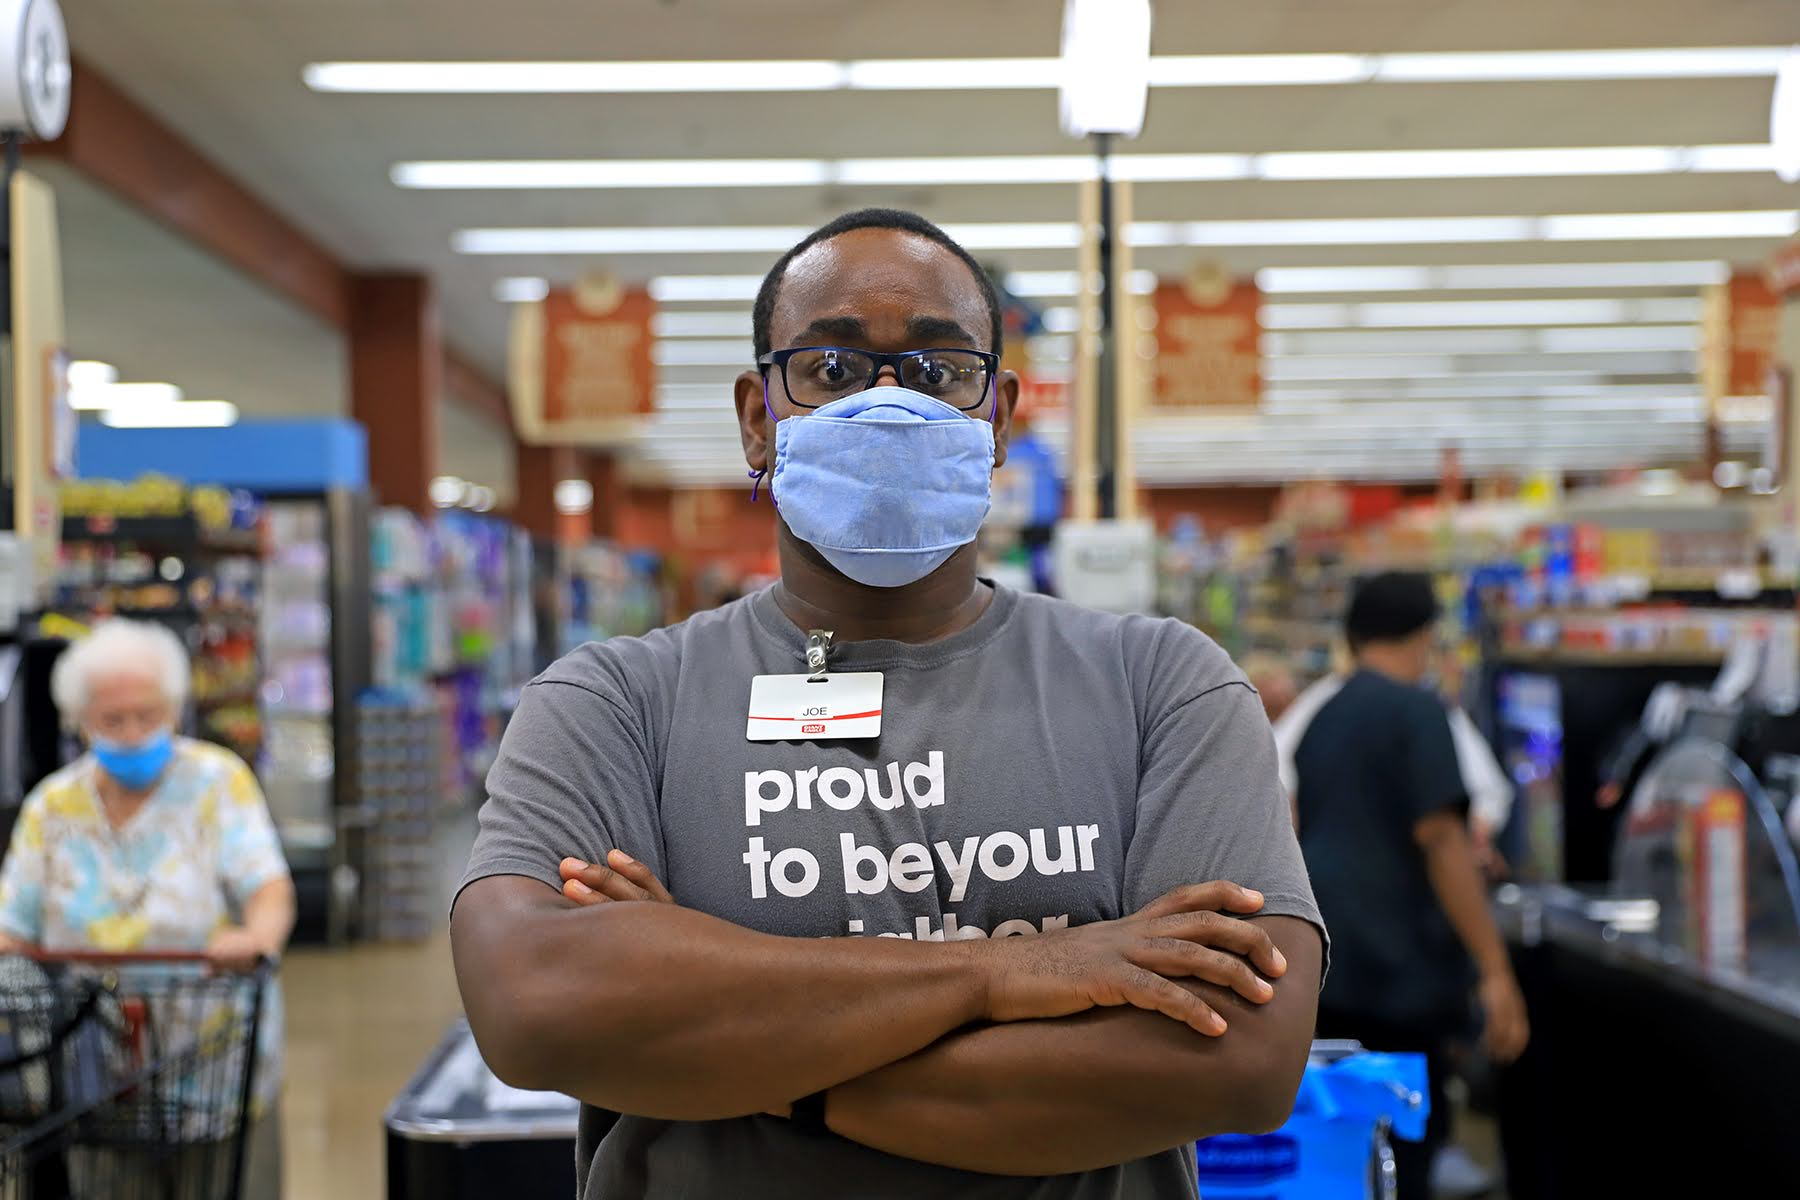 Photograph of essay author Joseph Vernon Smith. He is a Black man standing with his arms crossed looking at the camera. He wears a face mask and a Giant Eagle staff t-shirt that says proud to be your neighbor.